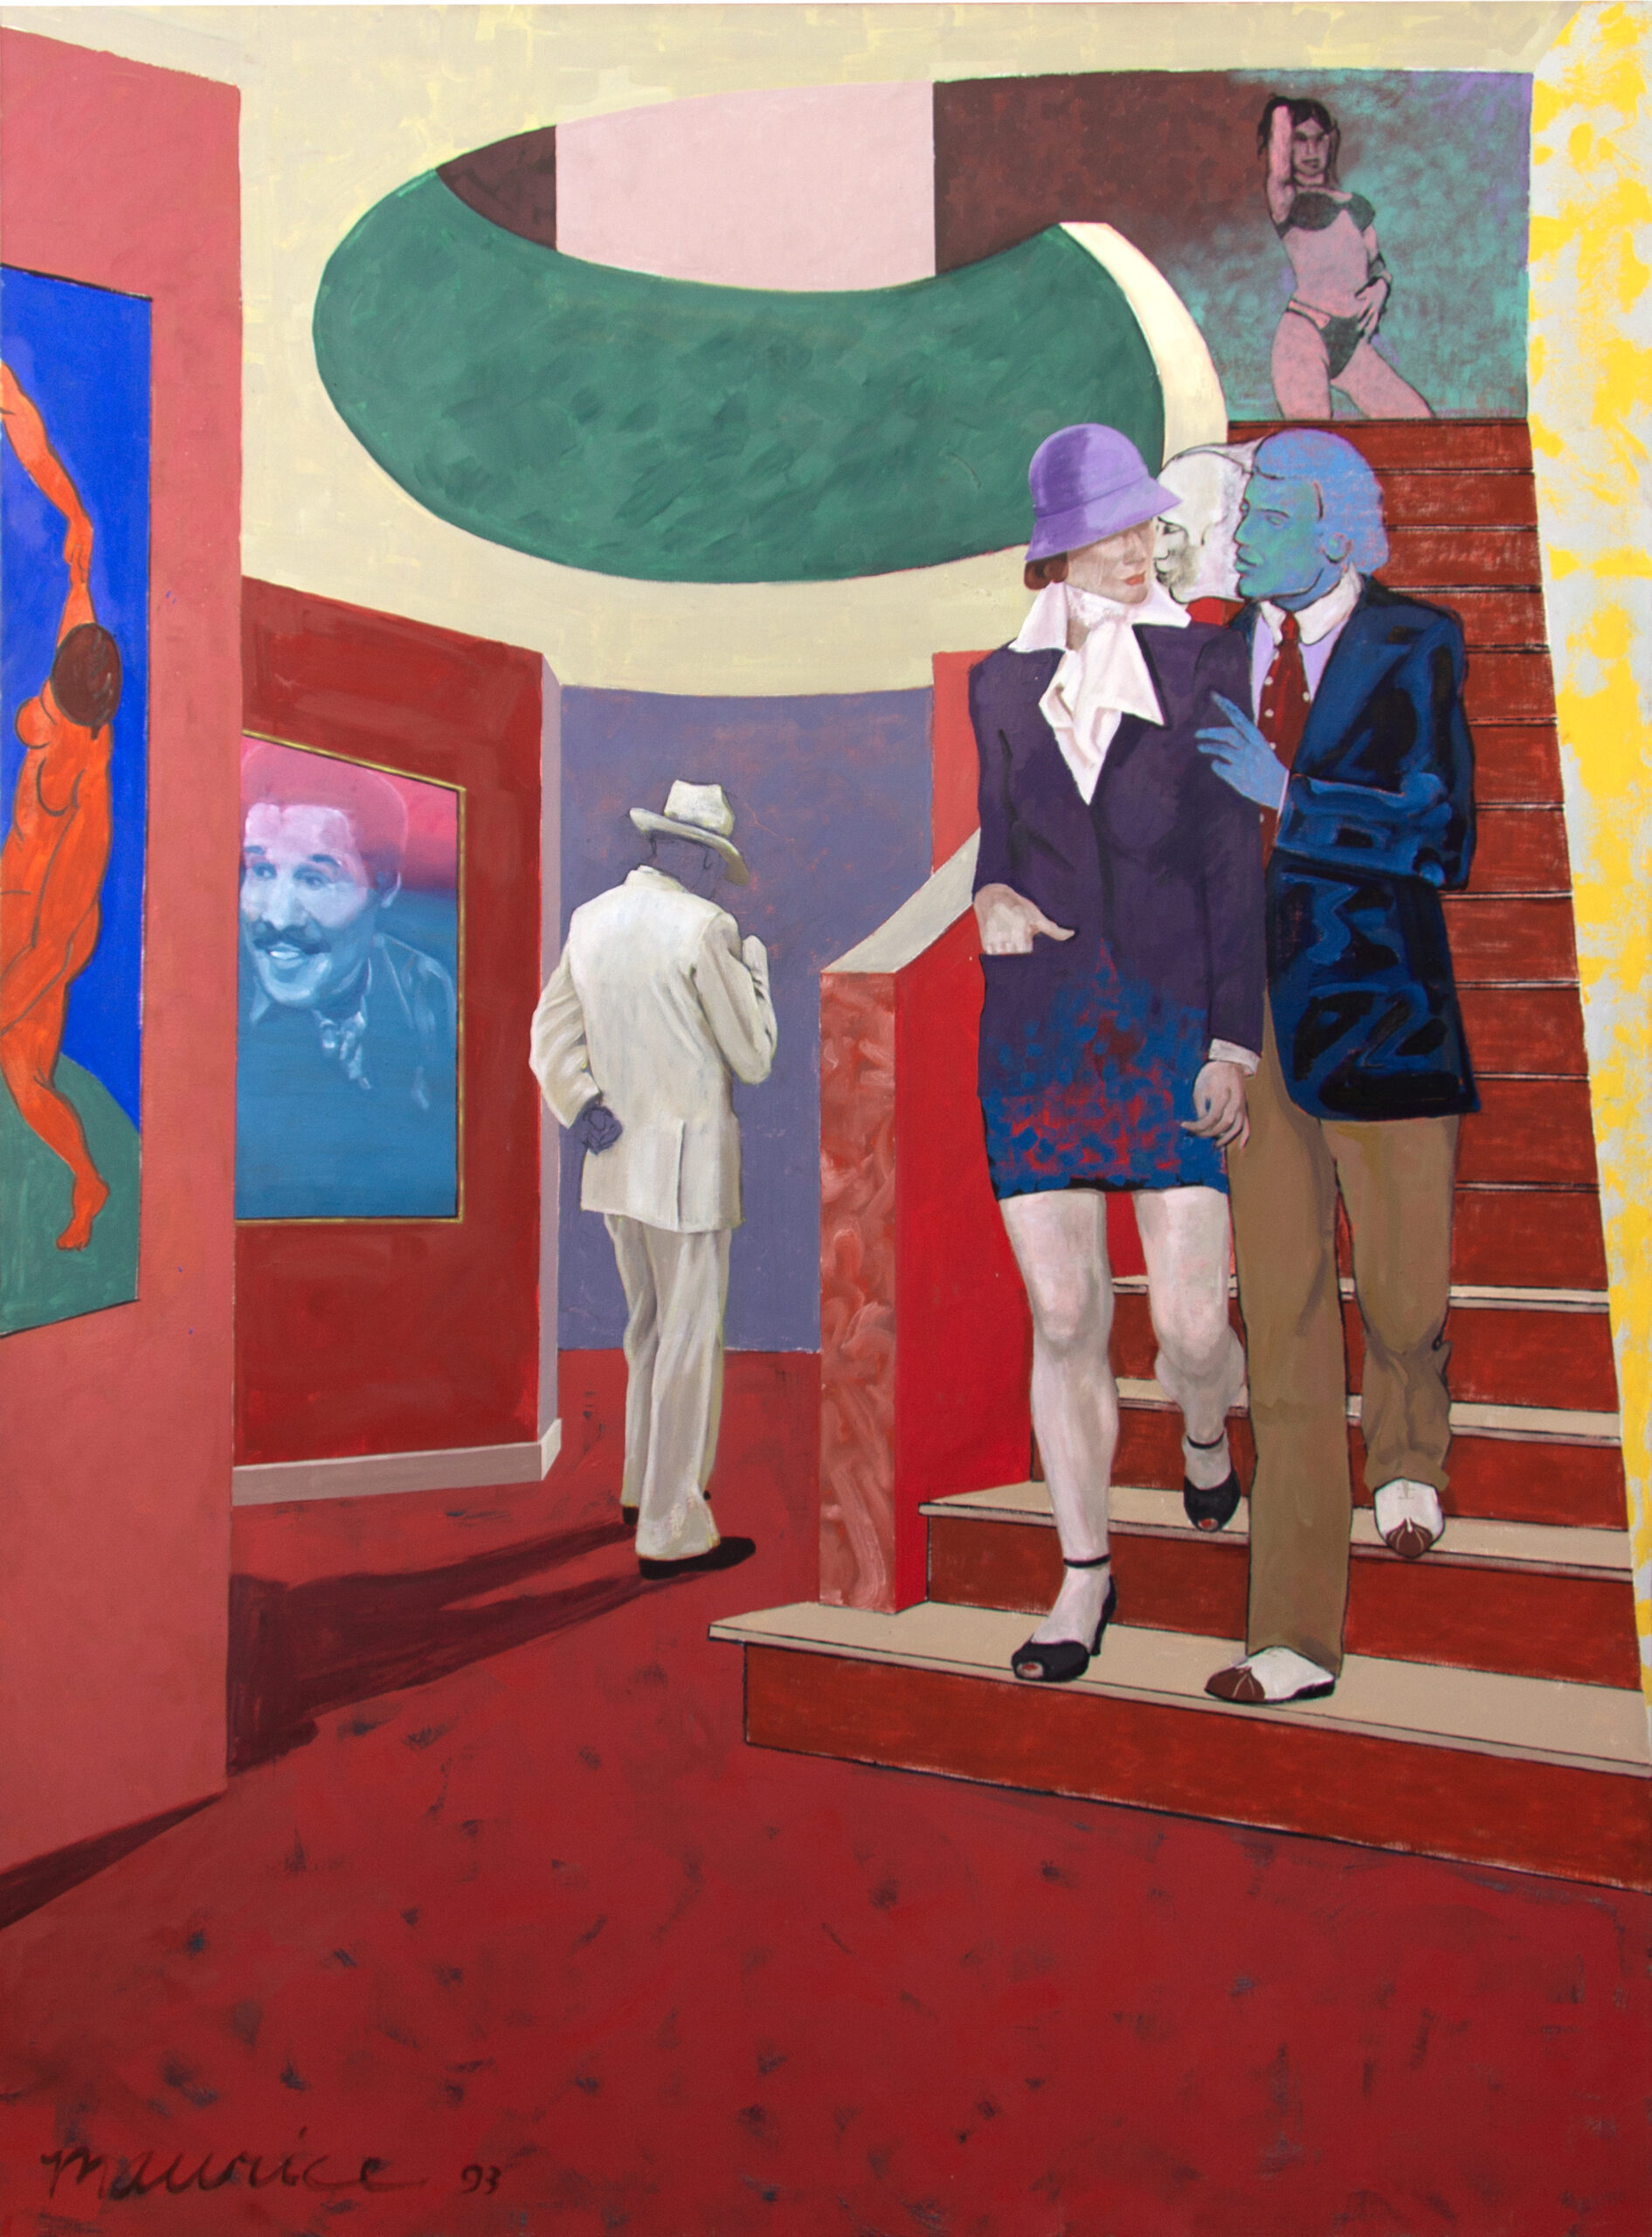 
		                					Maurice Burns		                																	
																											<i>Man in a White Suit,</i>  
																																								1993, 
																																								oil on canvas, 
																																								76 x 56 inches 
																								
		                				